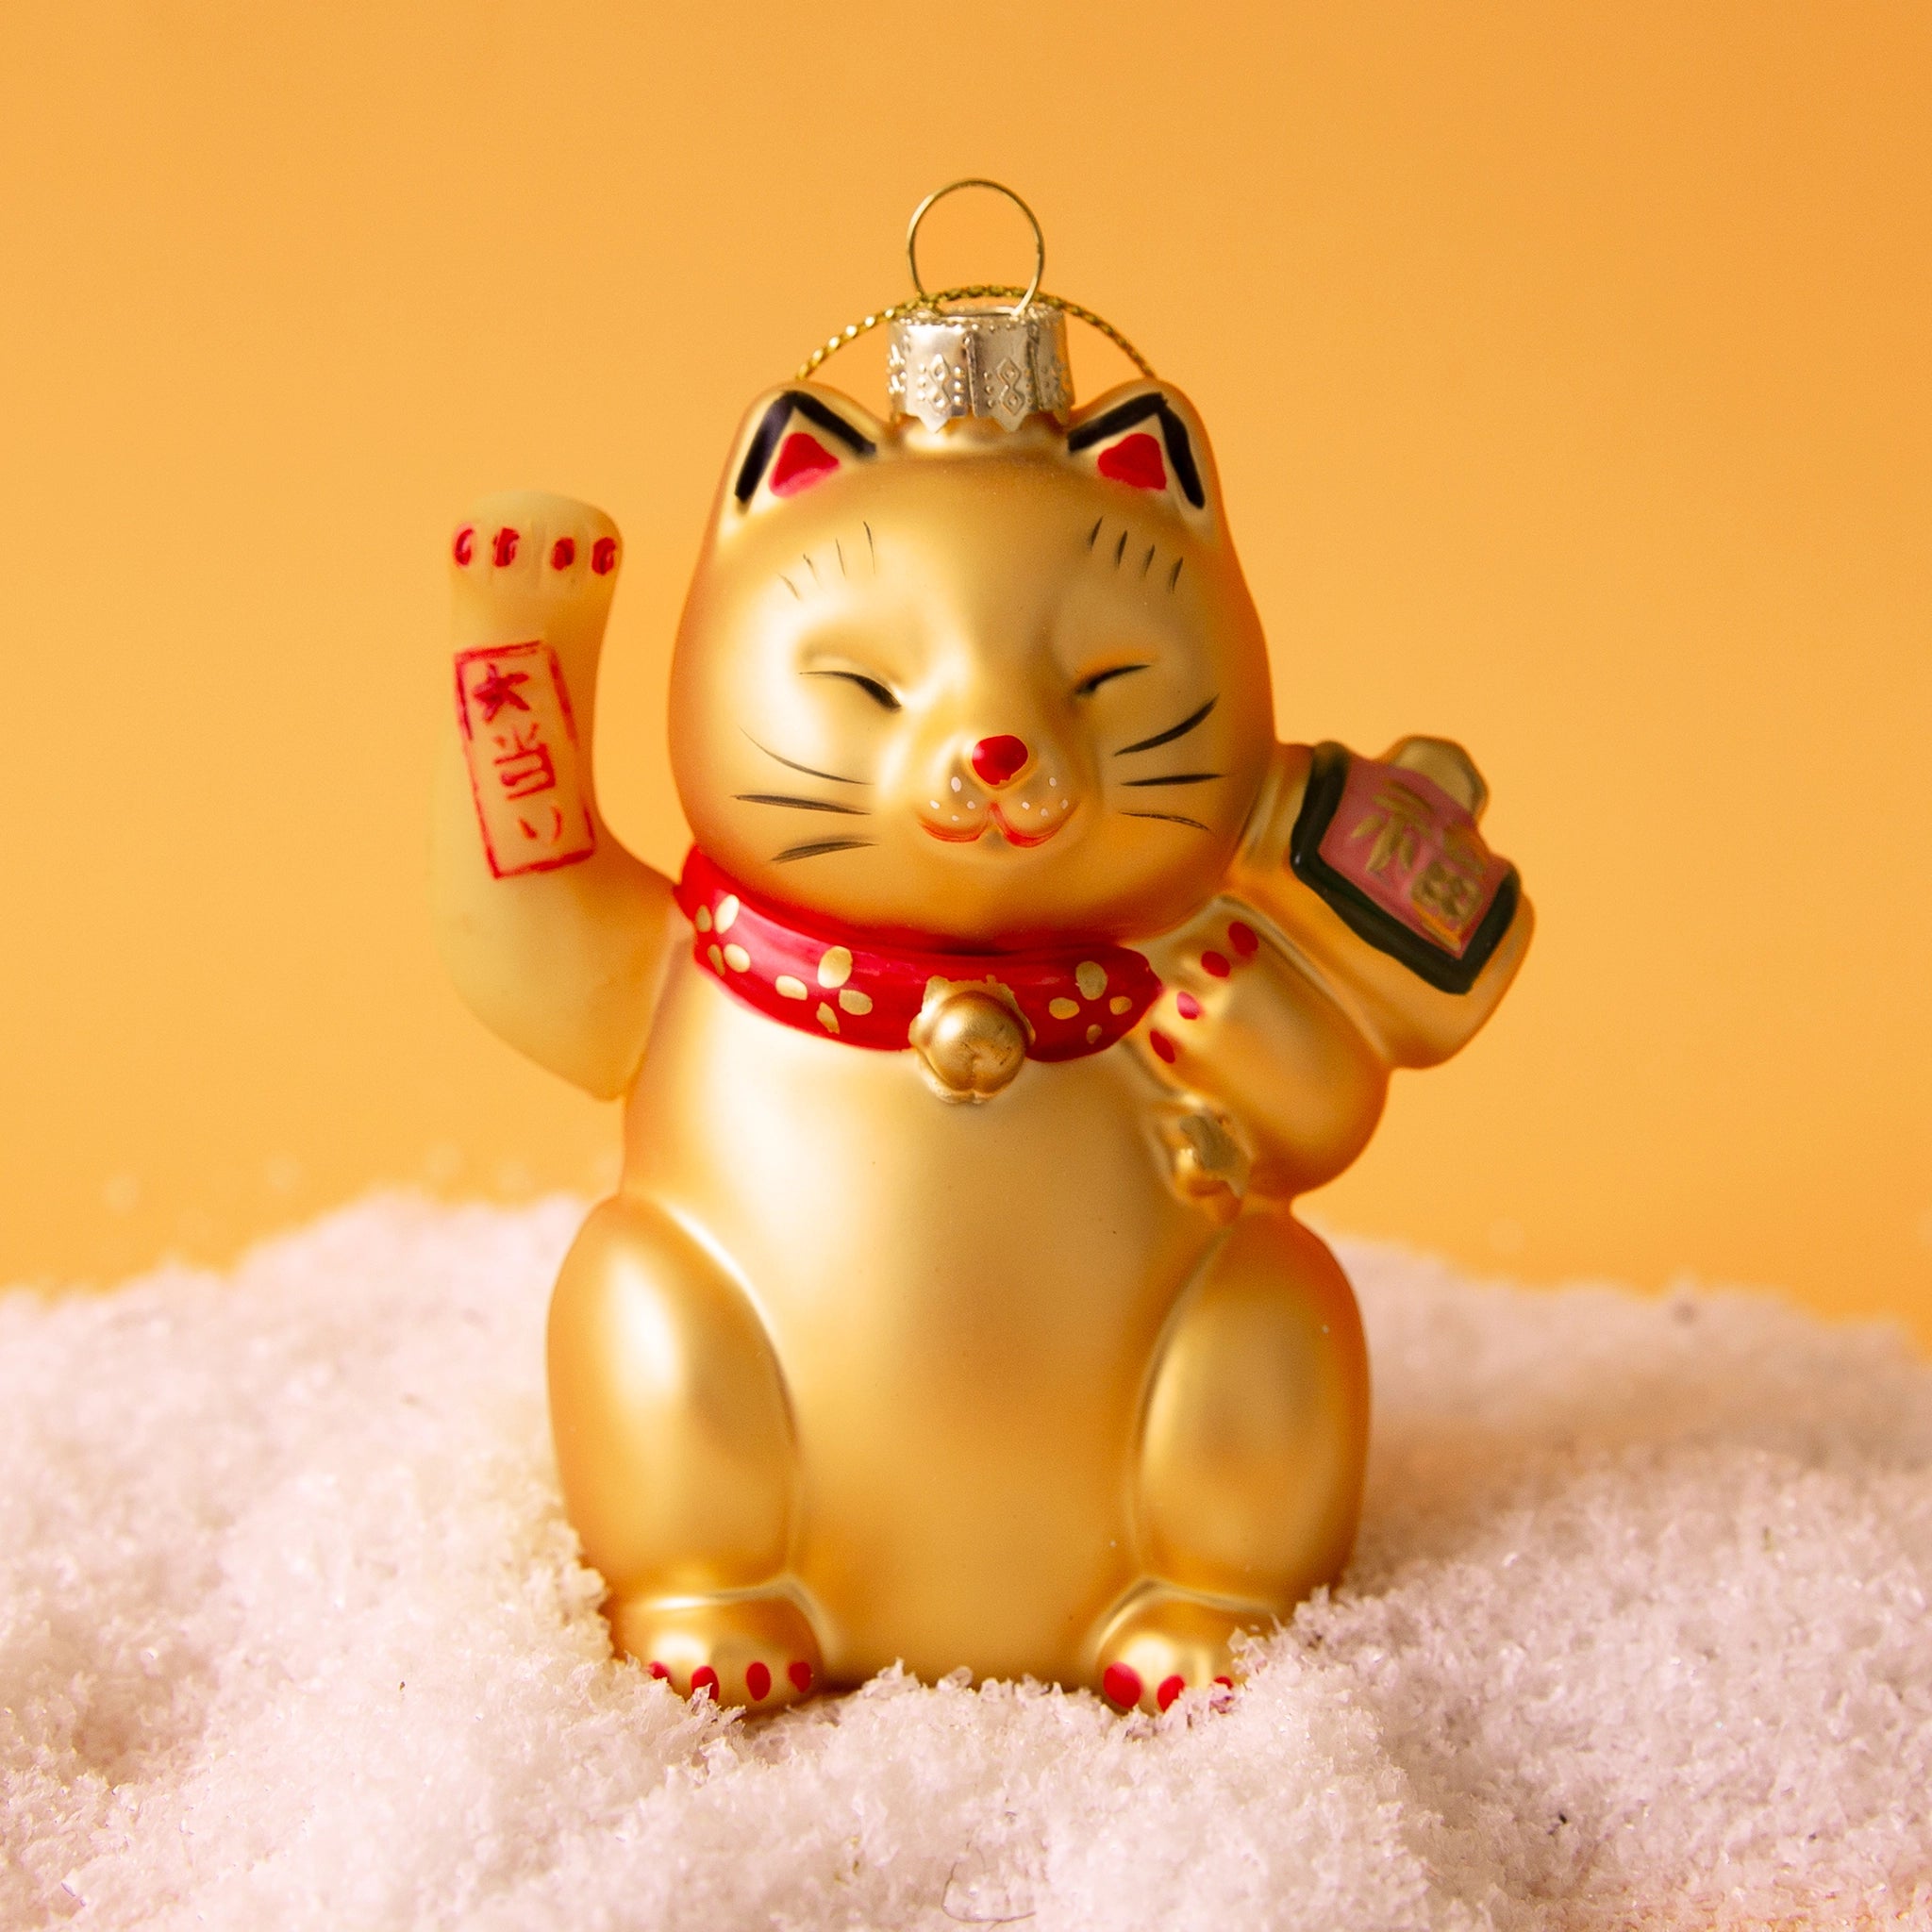 On a yellow background is a gold glass ornament in the shape of a smiling lucky cat.